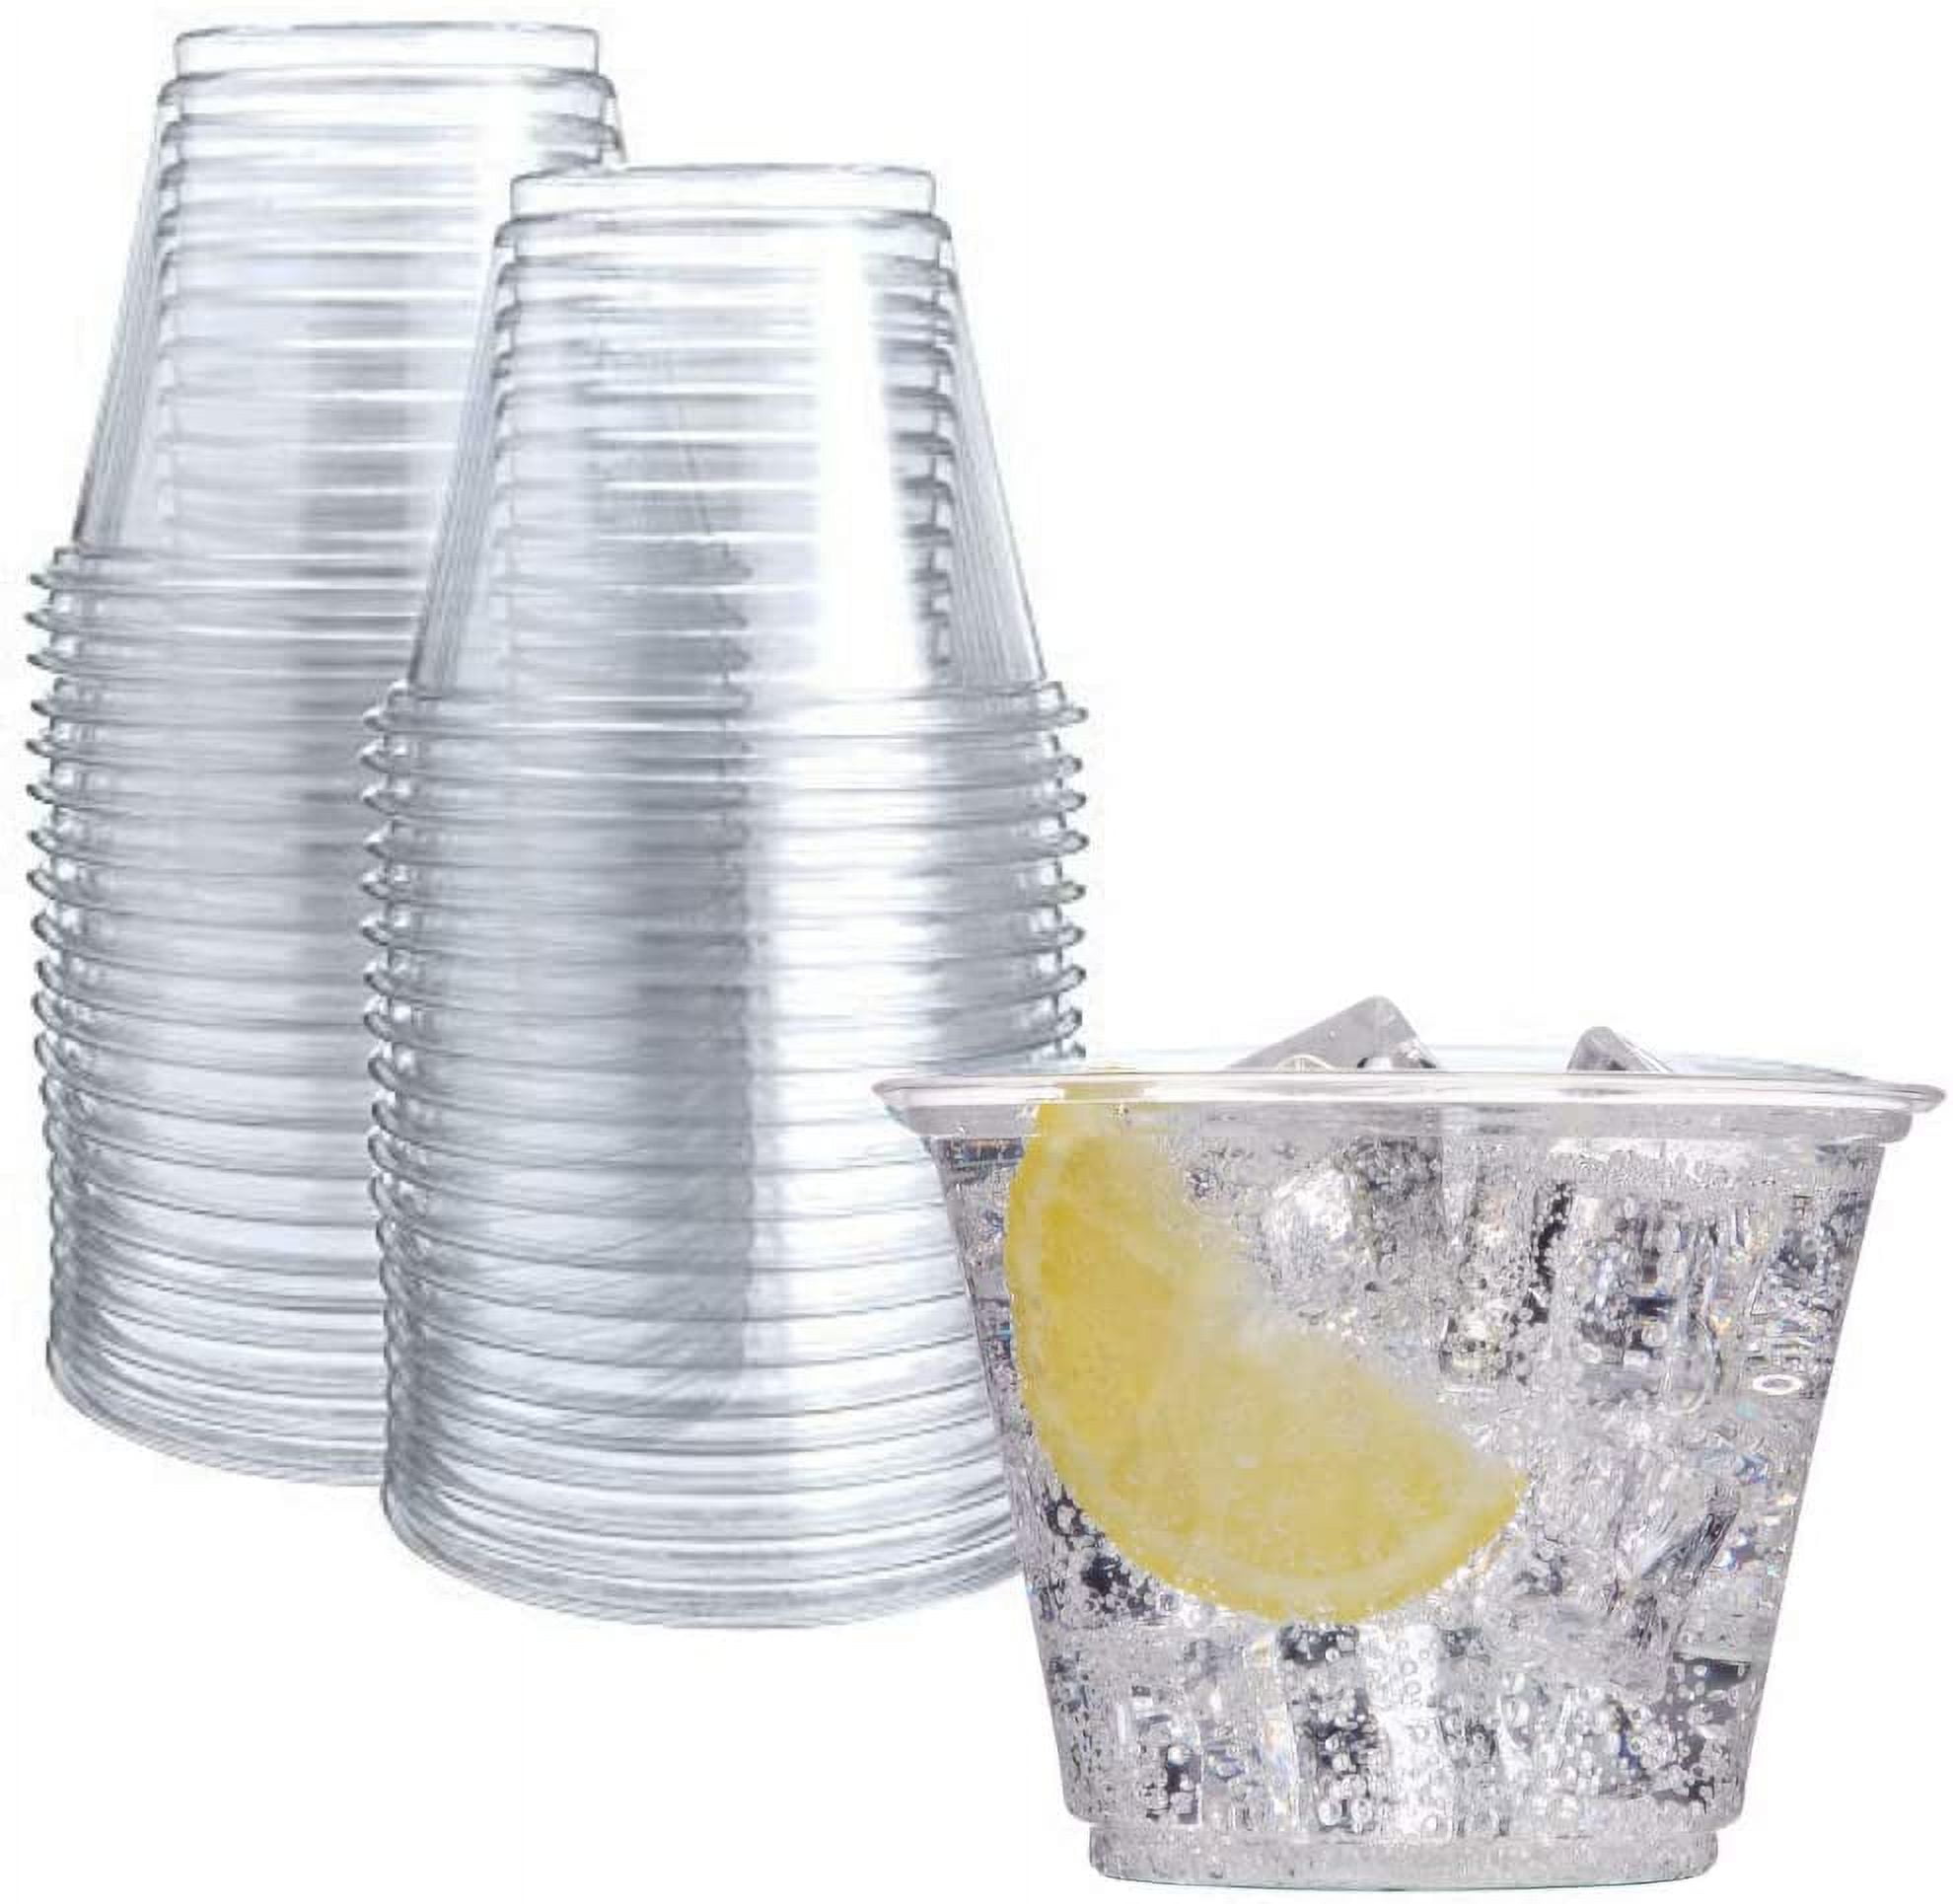 Dixie Crystal Clear Plastic Cups 9 Oz. Pack Of 50 - Office Depot